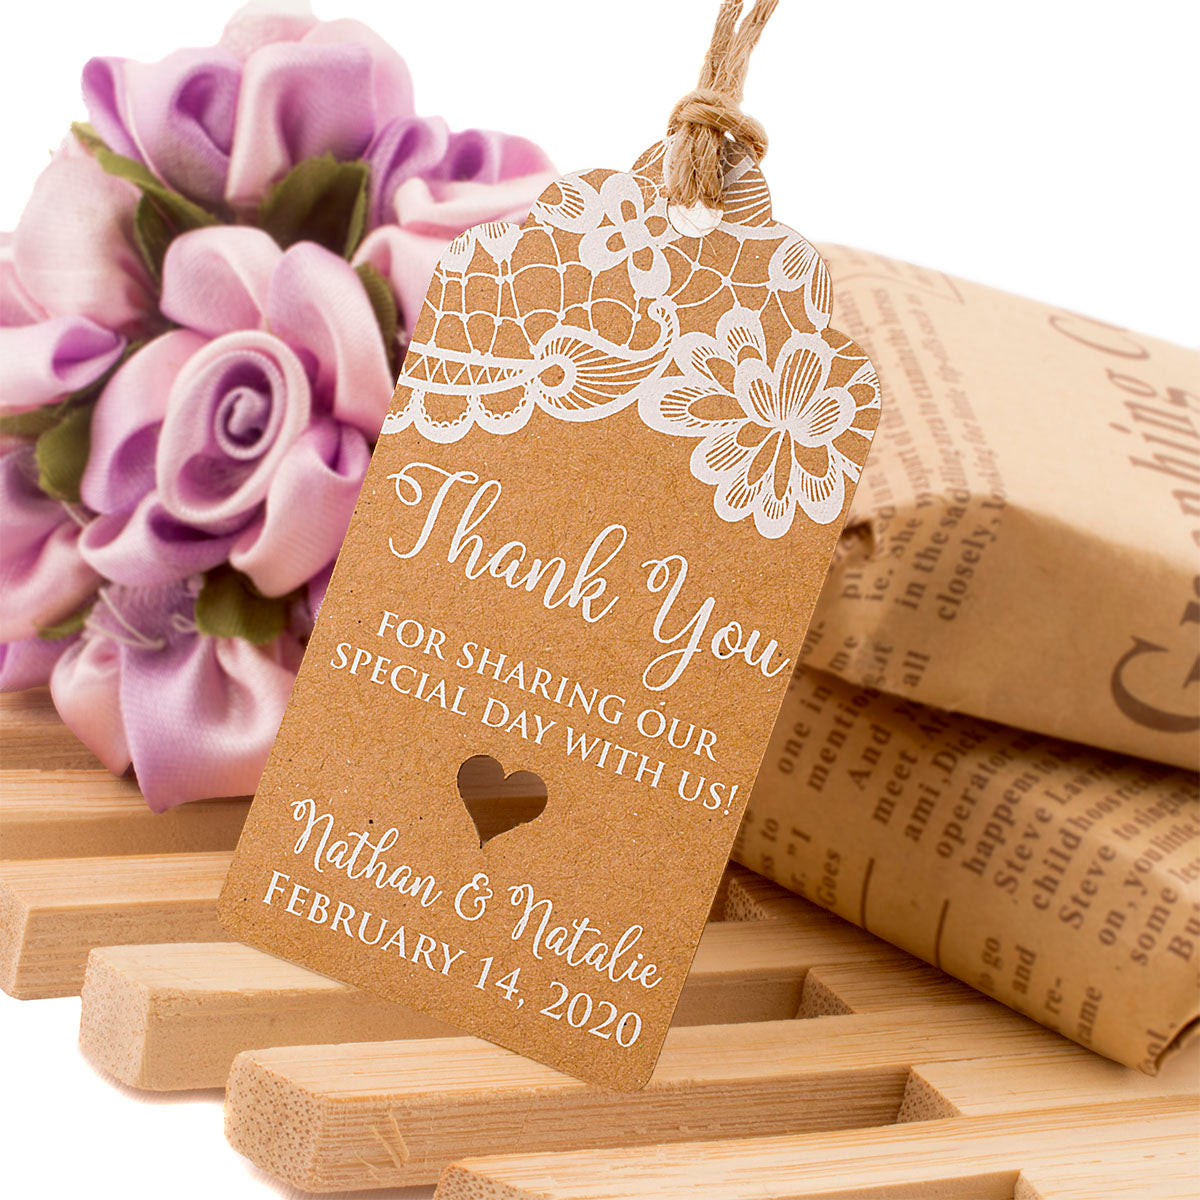 Personalized Thank You Tag, Wedding Thank You Tags, Gift Tags, Wedding  Favor, Thank You, Corporate Gifts Printed with FREE SHIPPING TPC9070